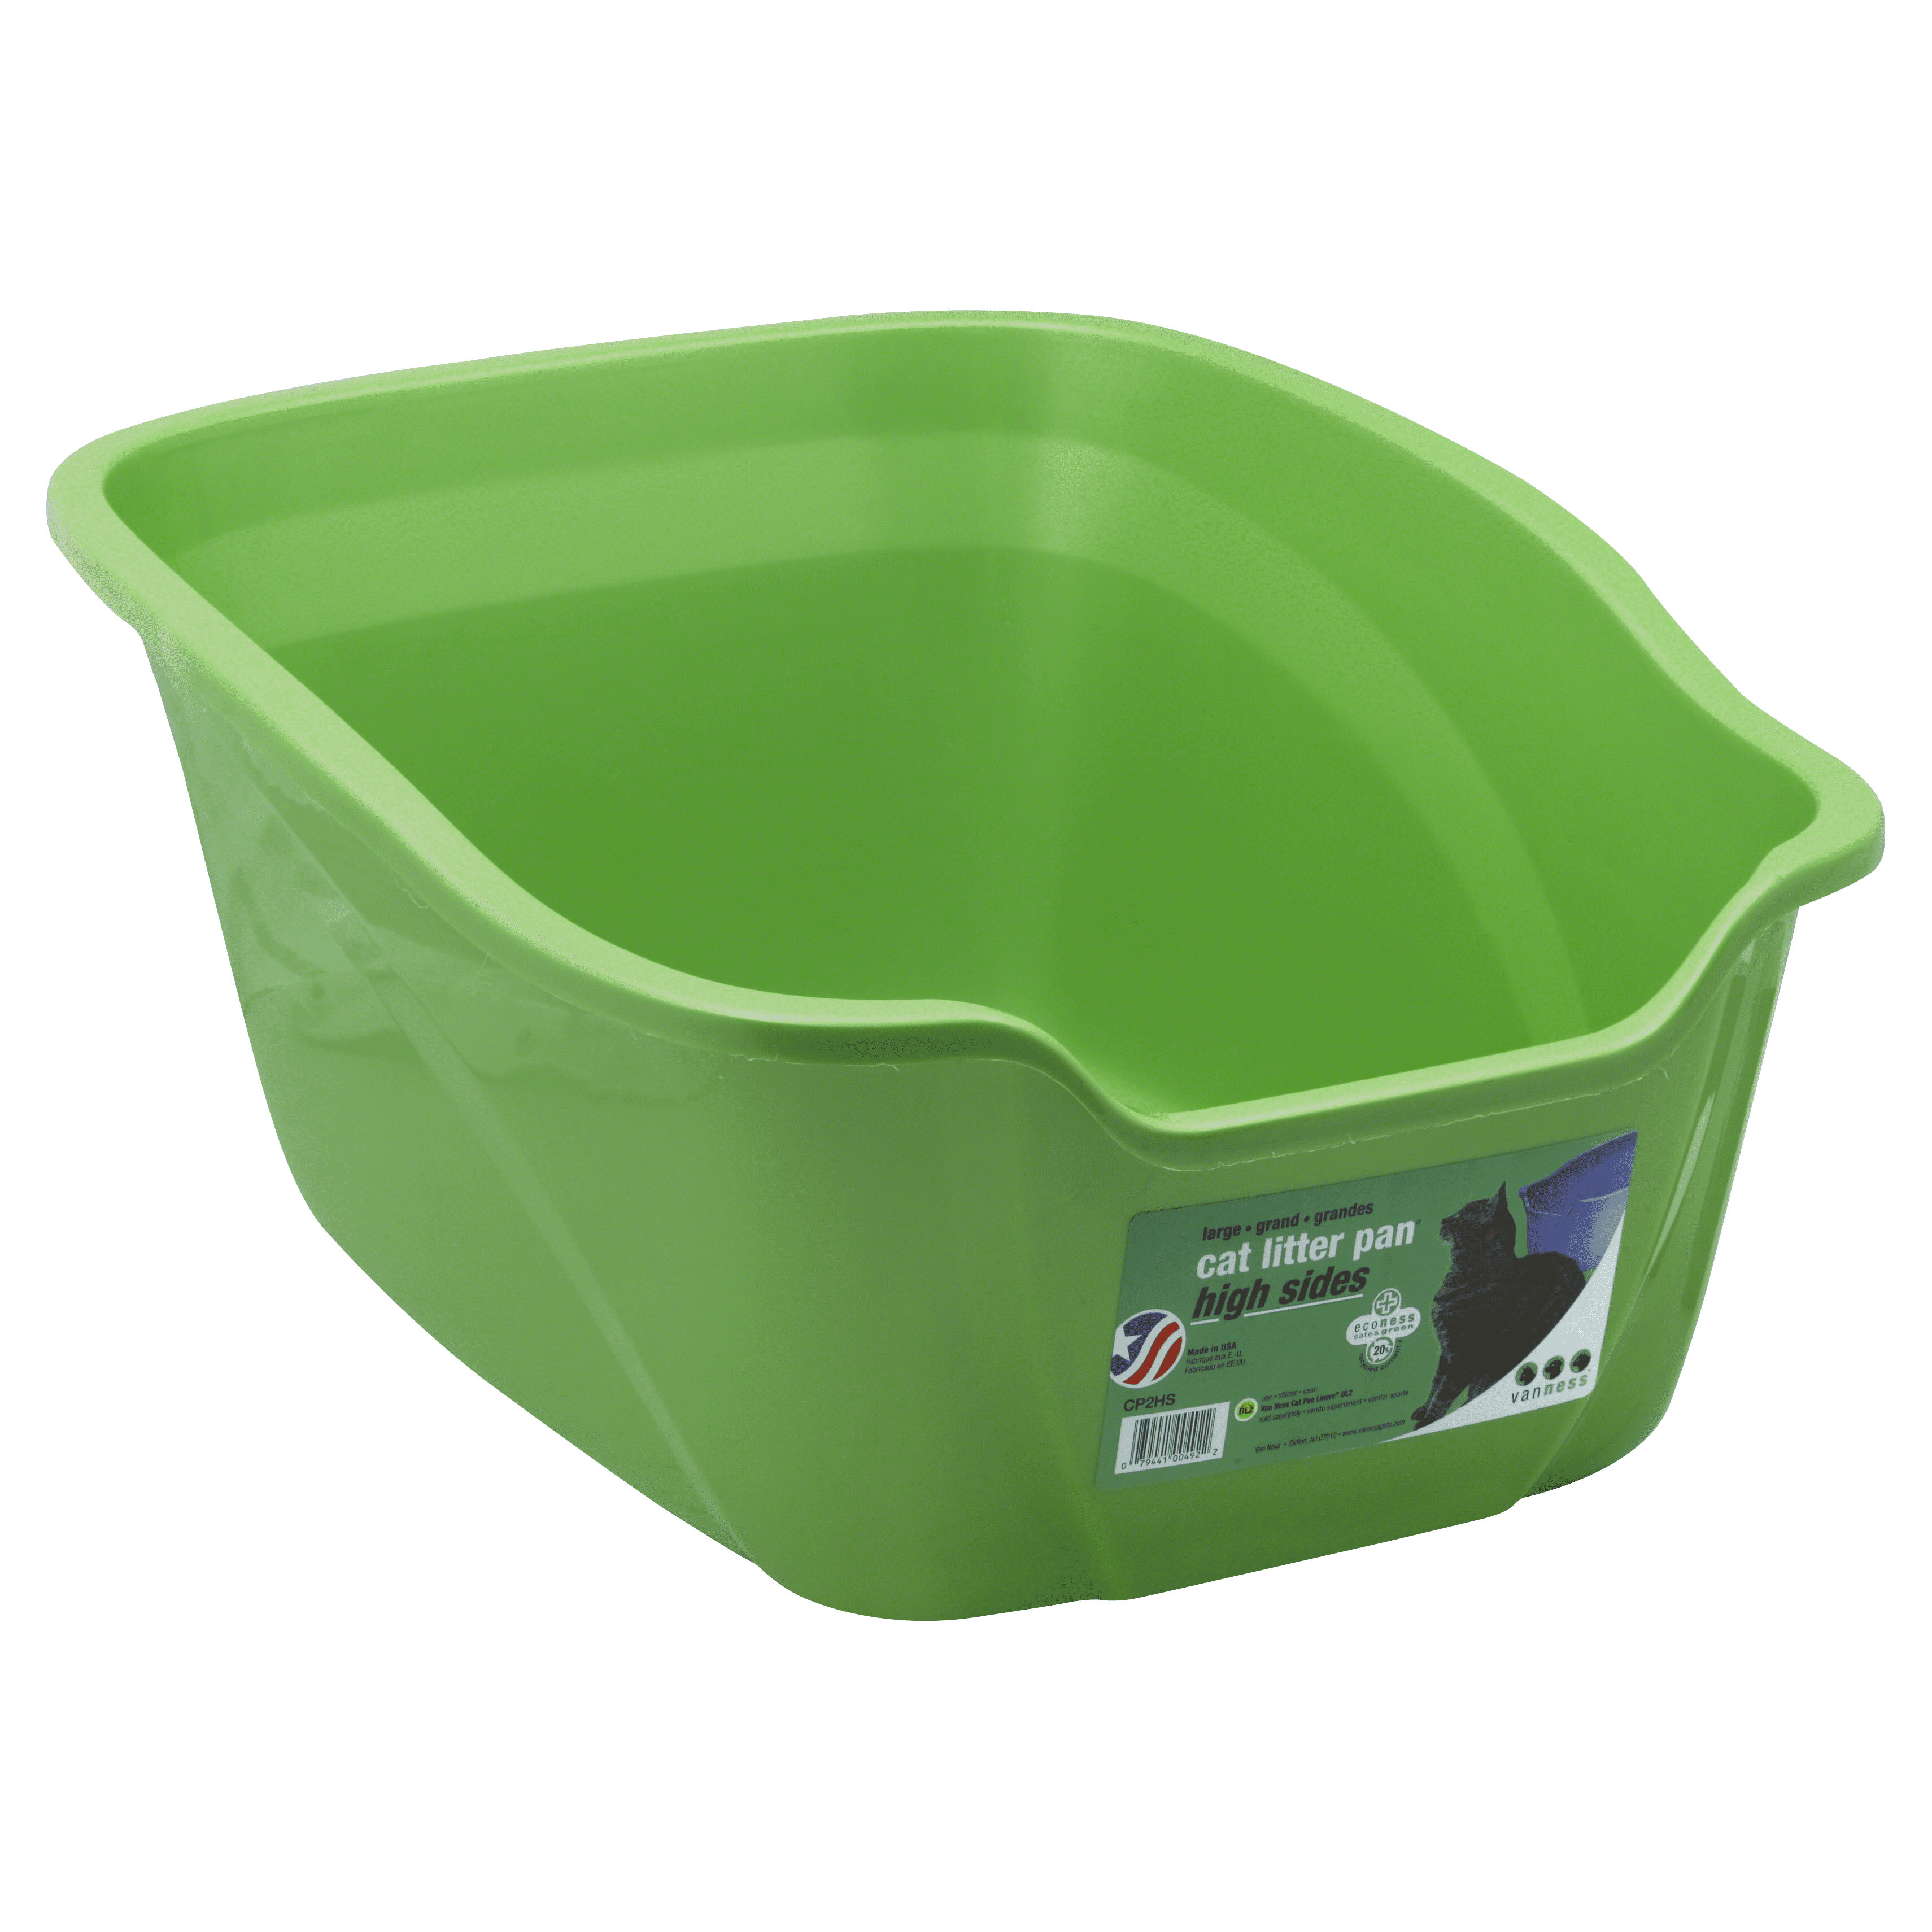 Van Litter Boxes Ness Large High Sides Cat Litter Pan Assorted Colors New 